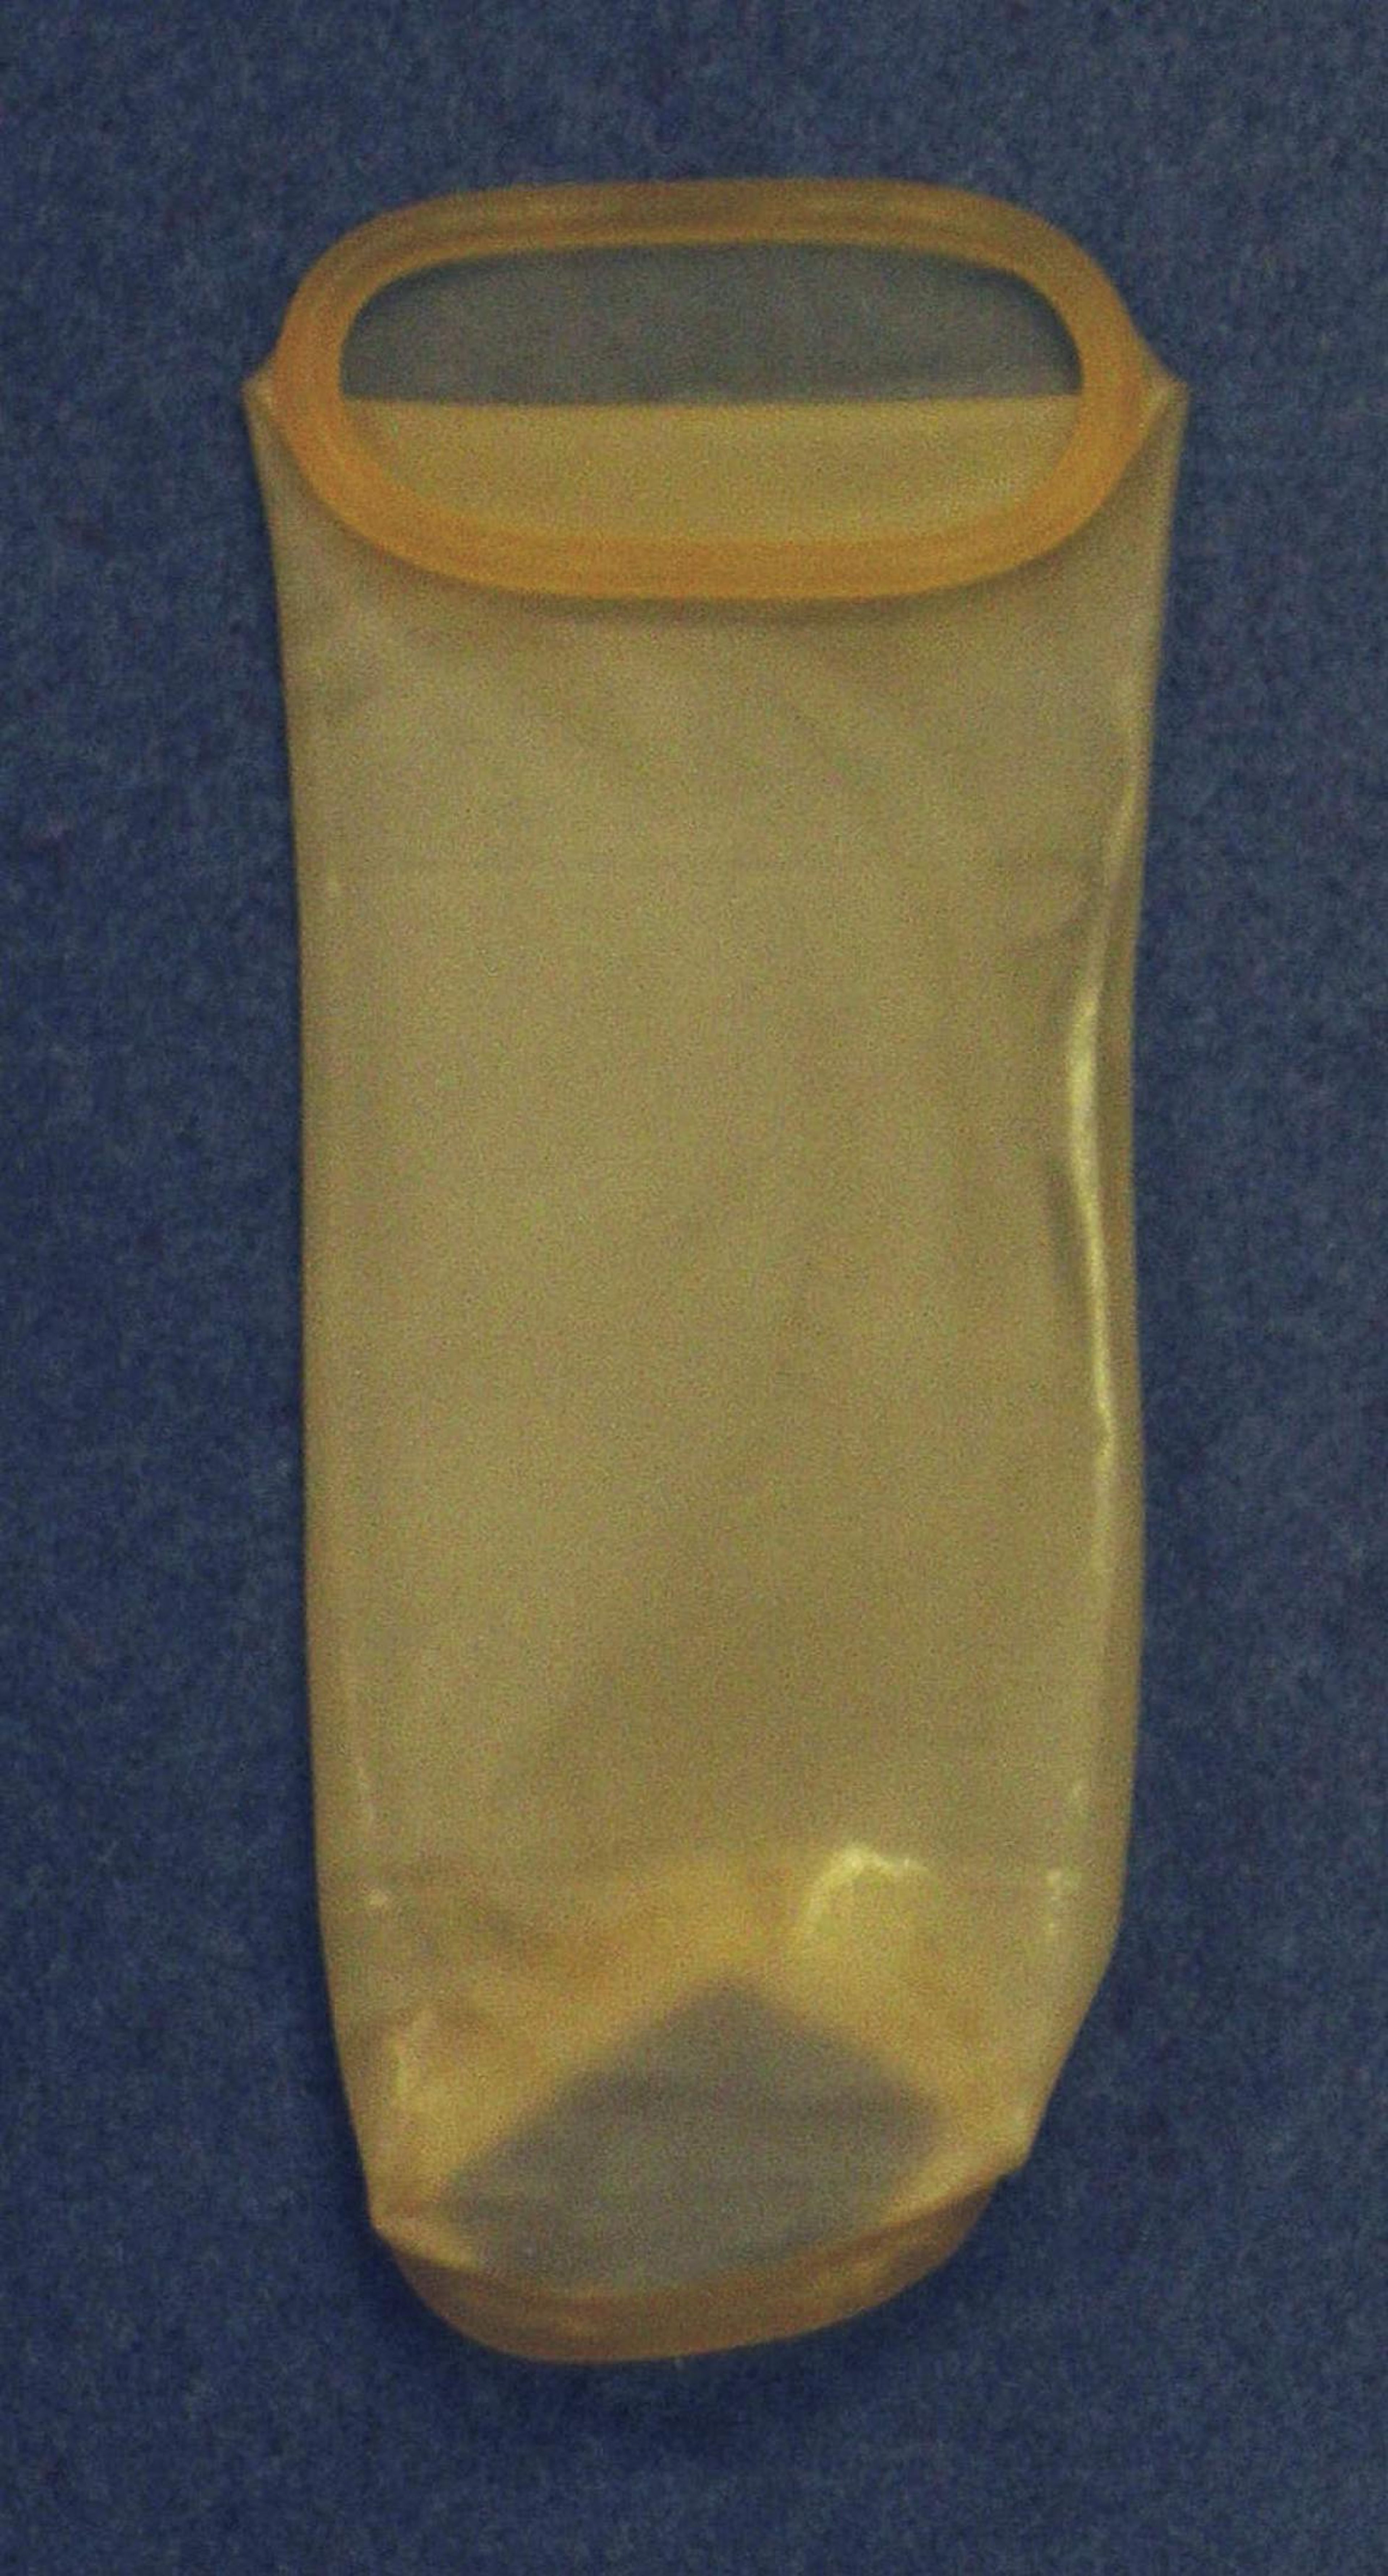 Some of the first pee-catchers looked like condoms and came in three sizes. NASA called them roll-on cuffs, and they were not designed to be used by women.